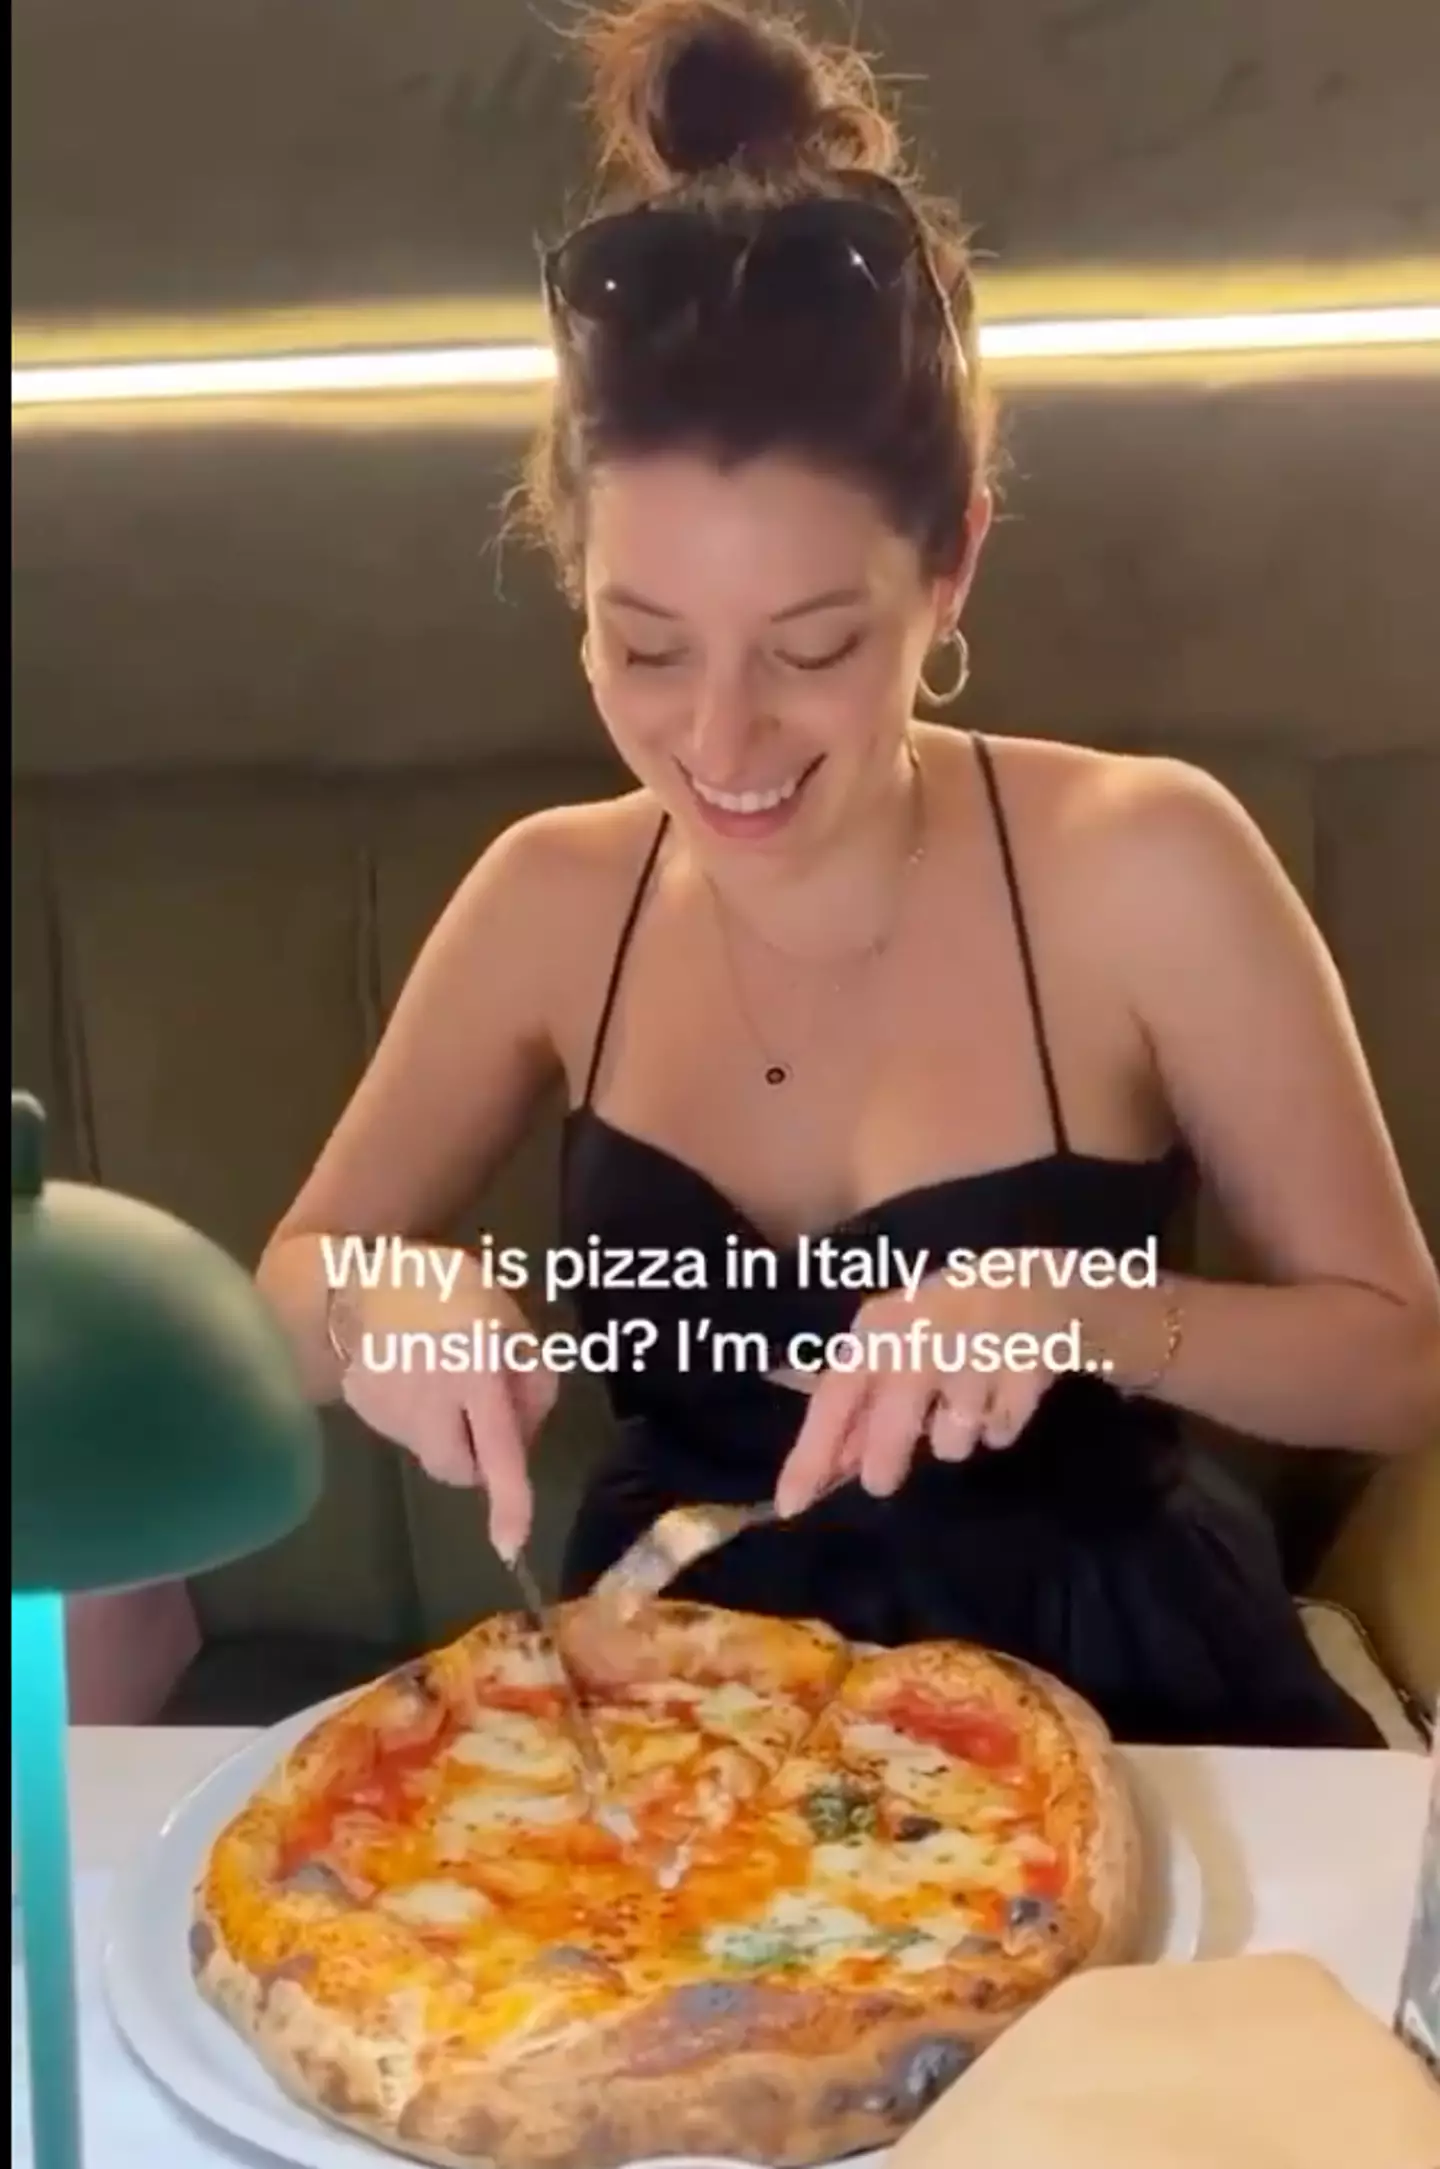 Have you ever wondered why if you go to an authentic Italian restaurant the pizza you order isn’t sliced?